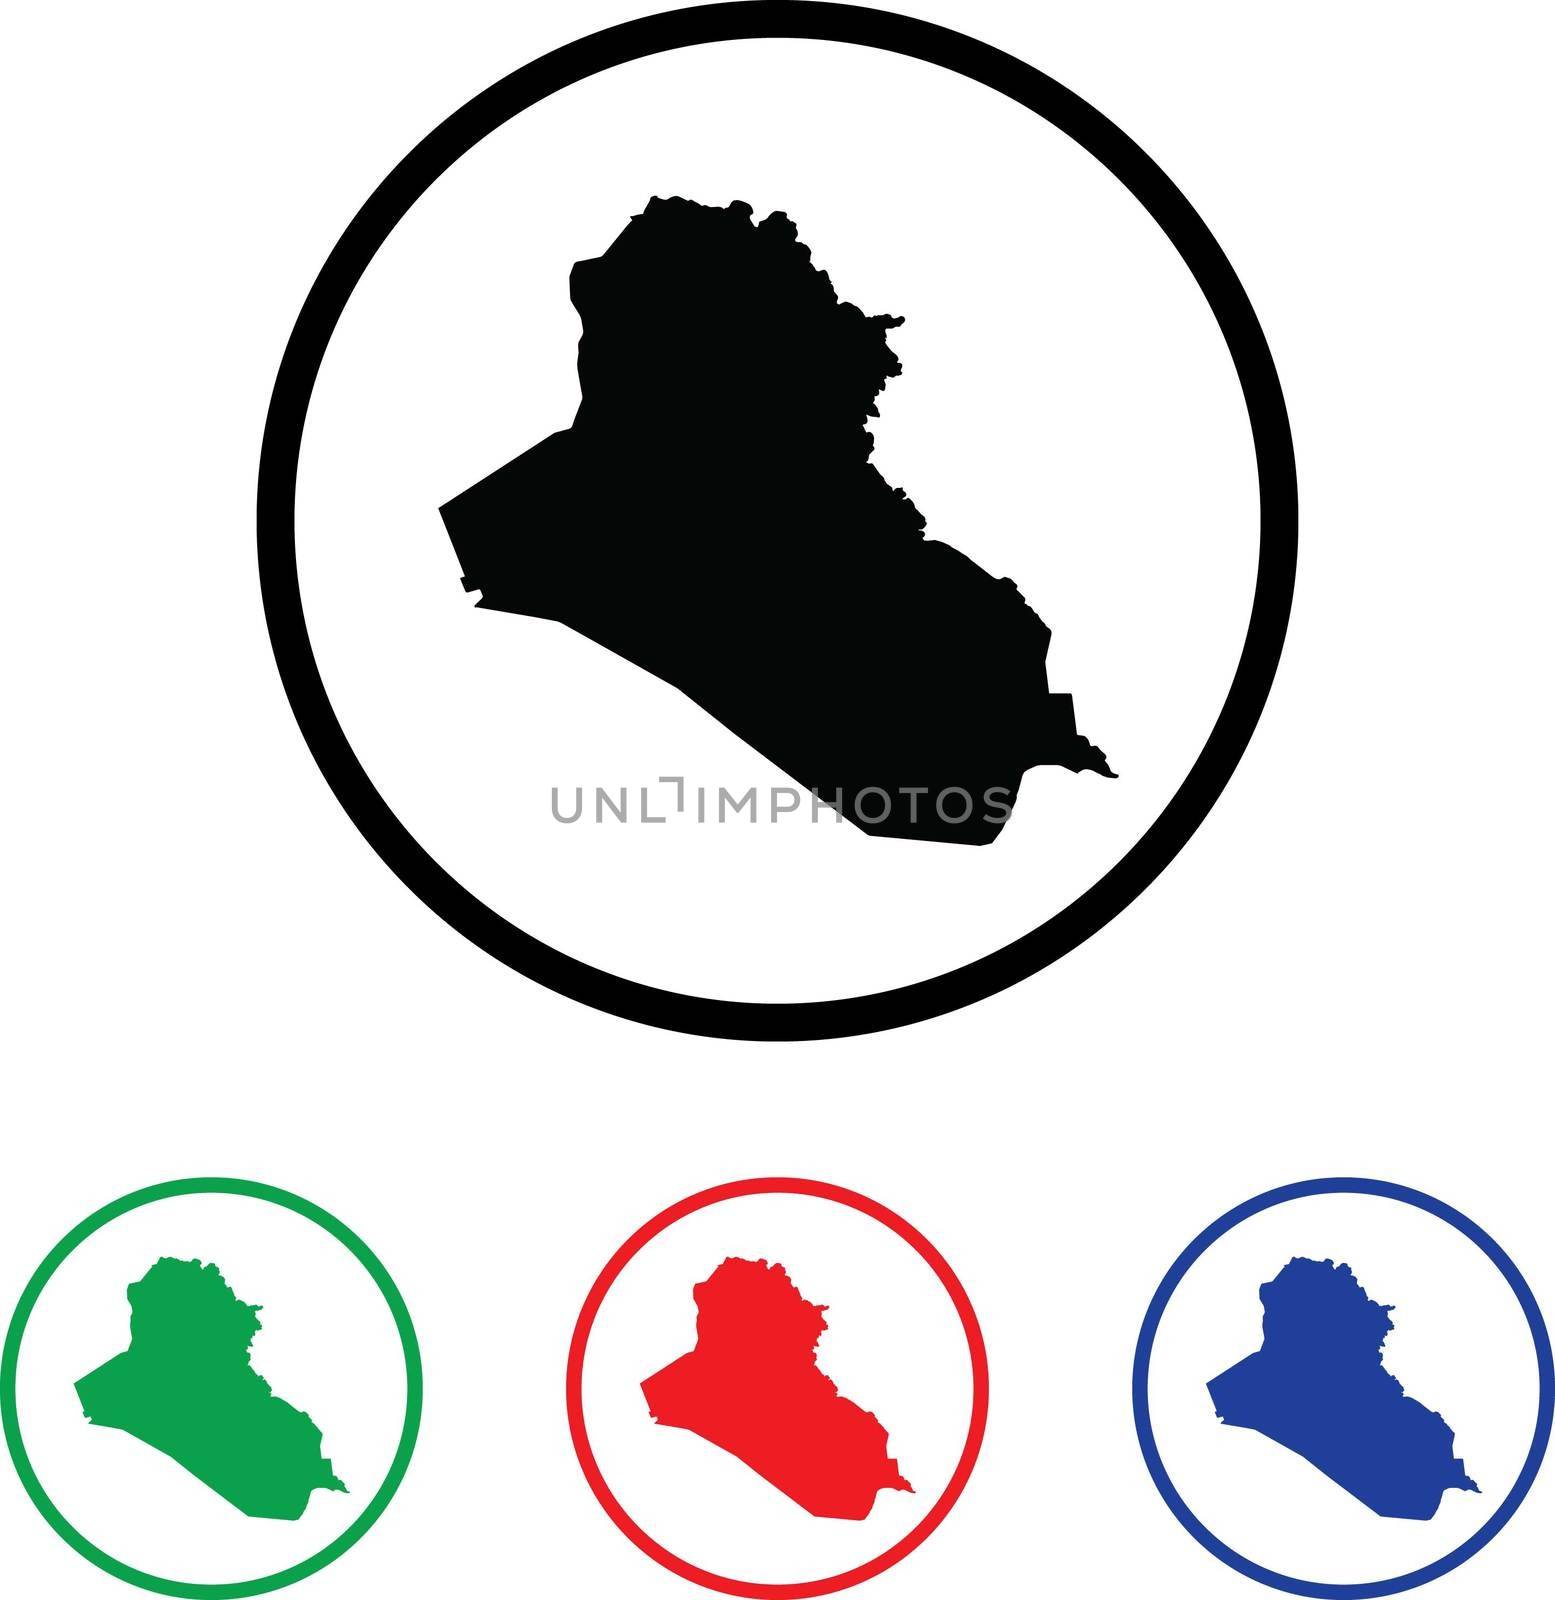 Iraq Icon Illustration with Four Color Variations